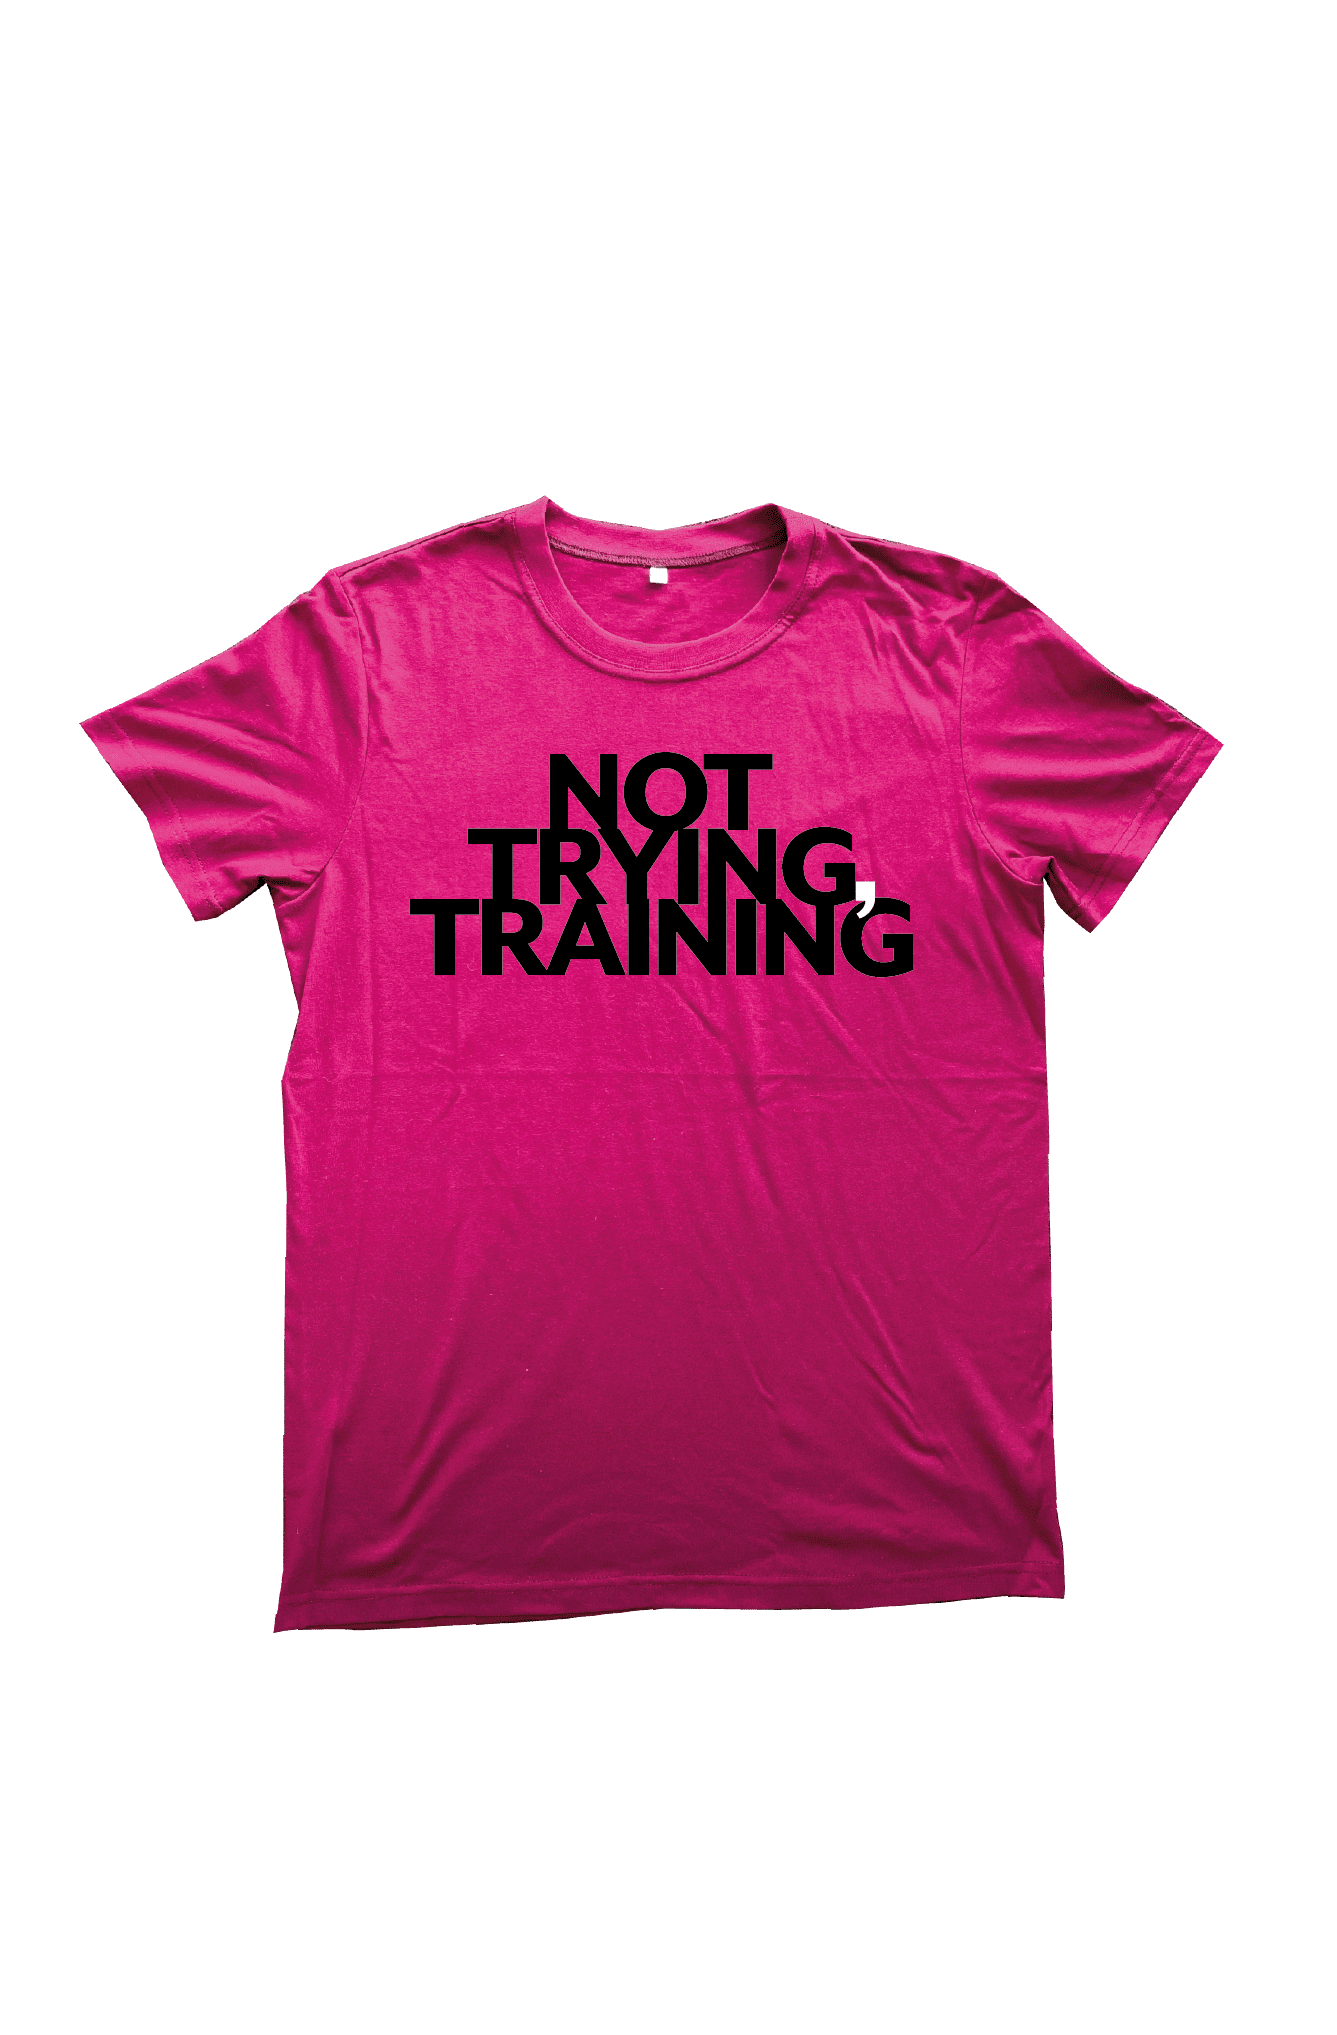 Not Trying, Training